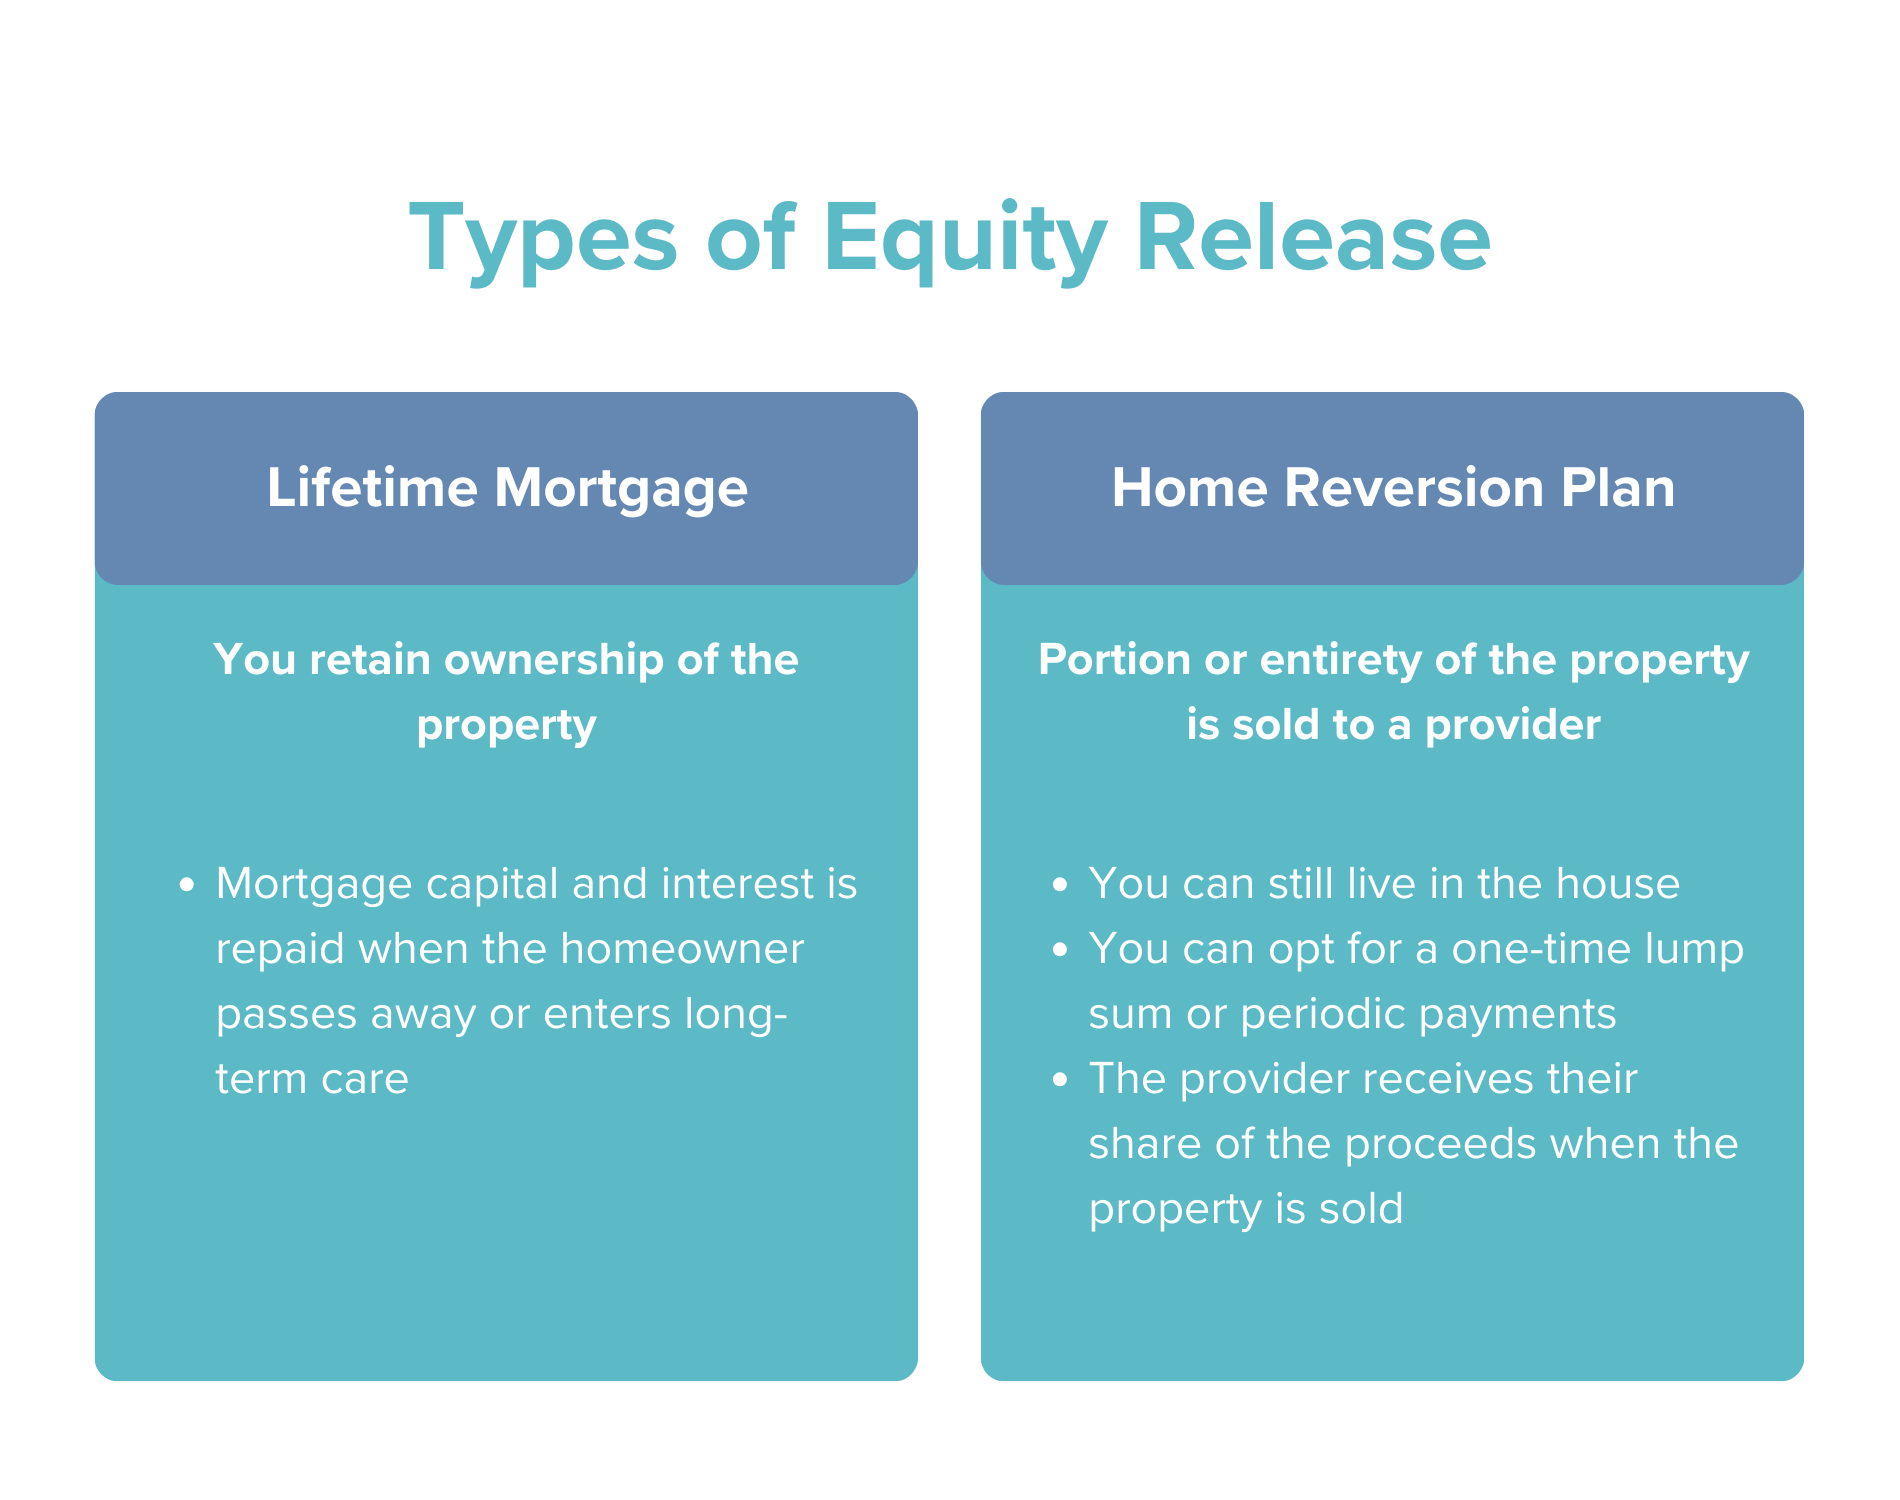 lifetime mortgage vs home reversion plan equity release